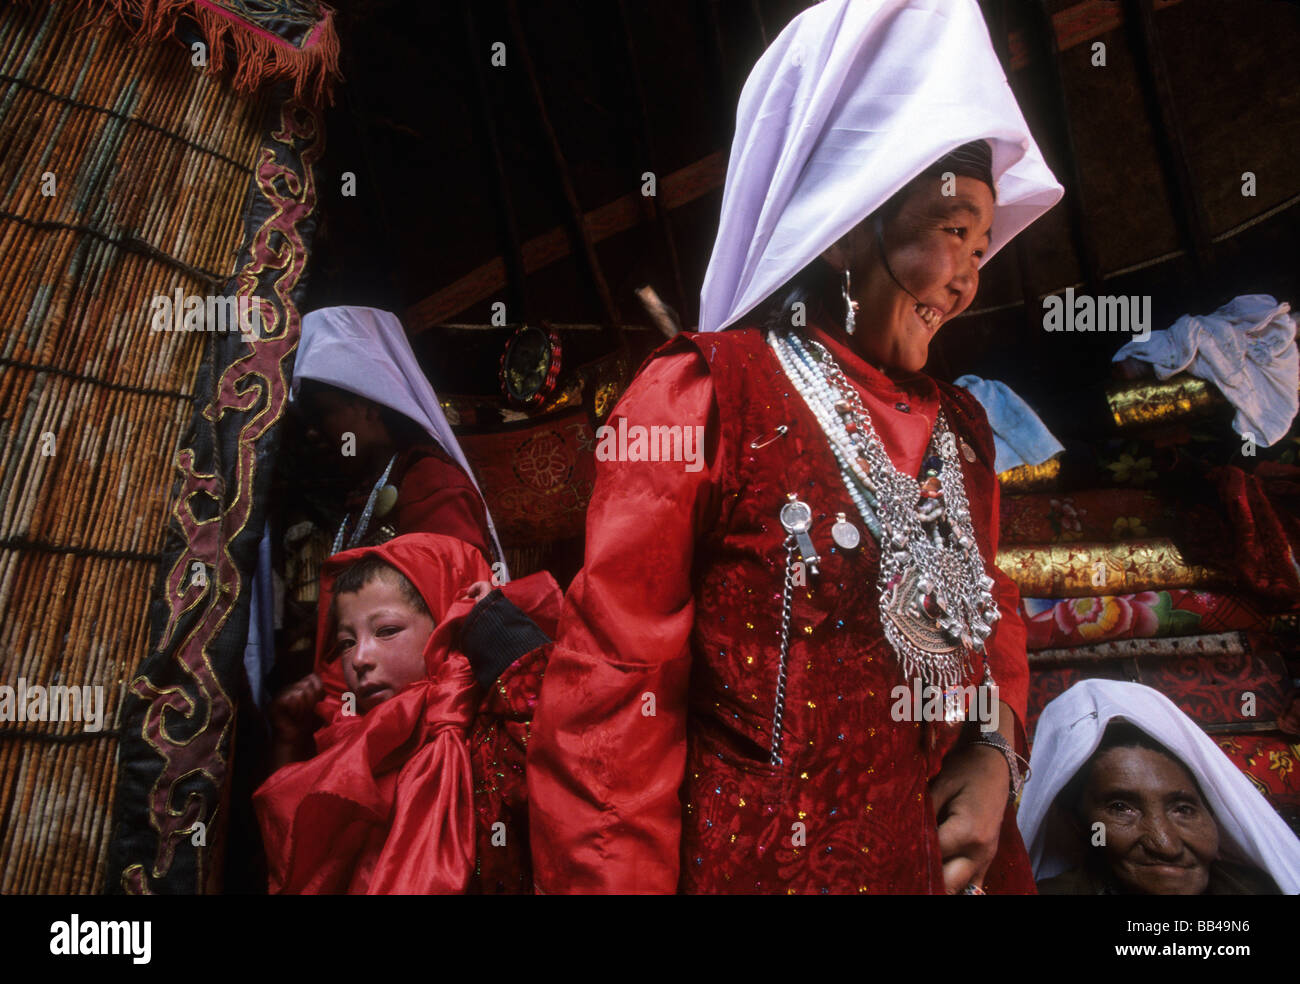 Kyrgyz women in traditional dress visit with each other inside a yurt in the Little Pamirs, Wakhan Corridor Stock Photo